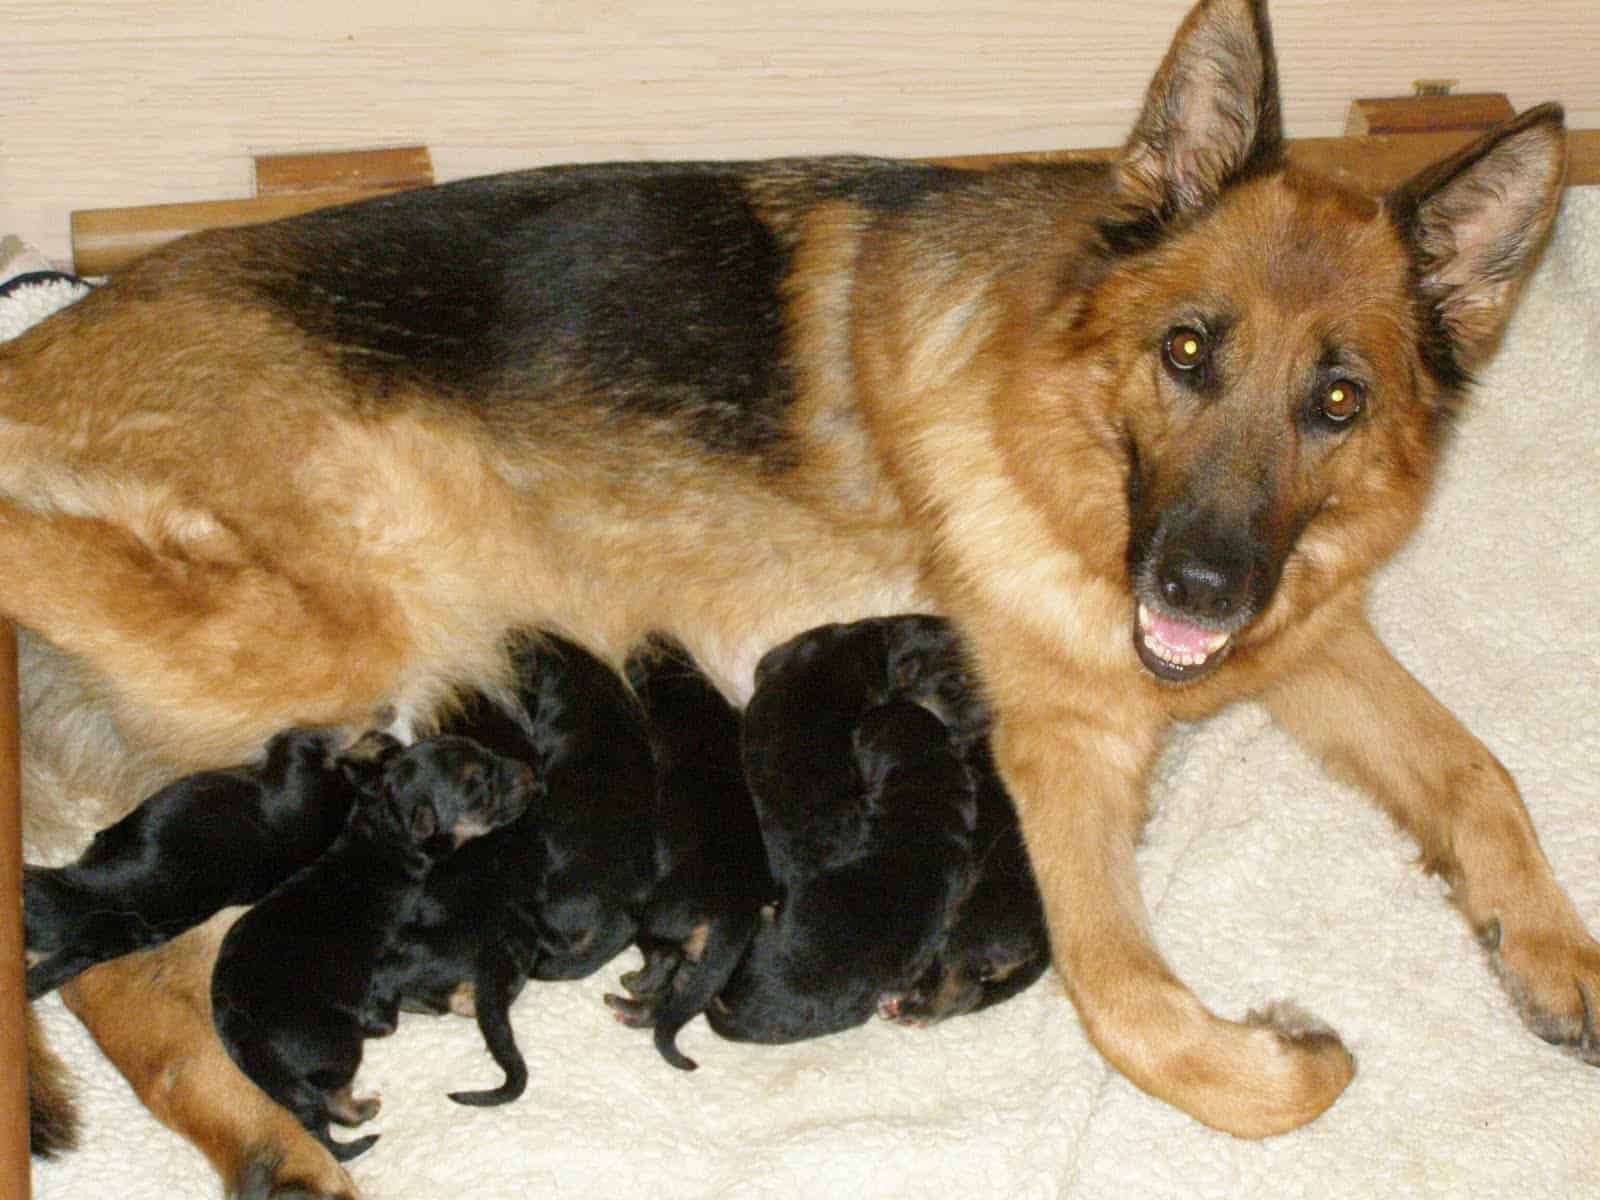 How Many Puppies Can a German Shepherd Have?